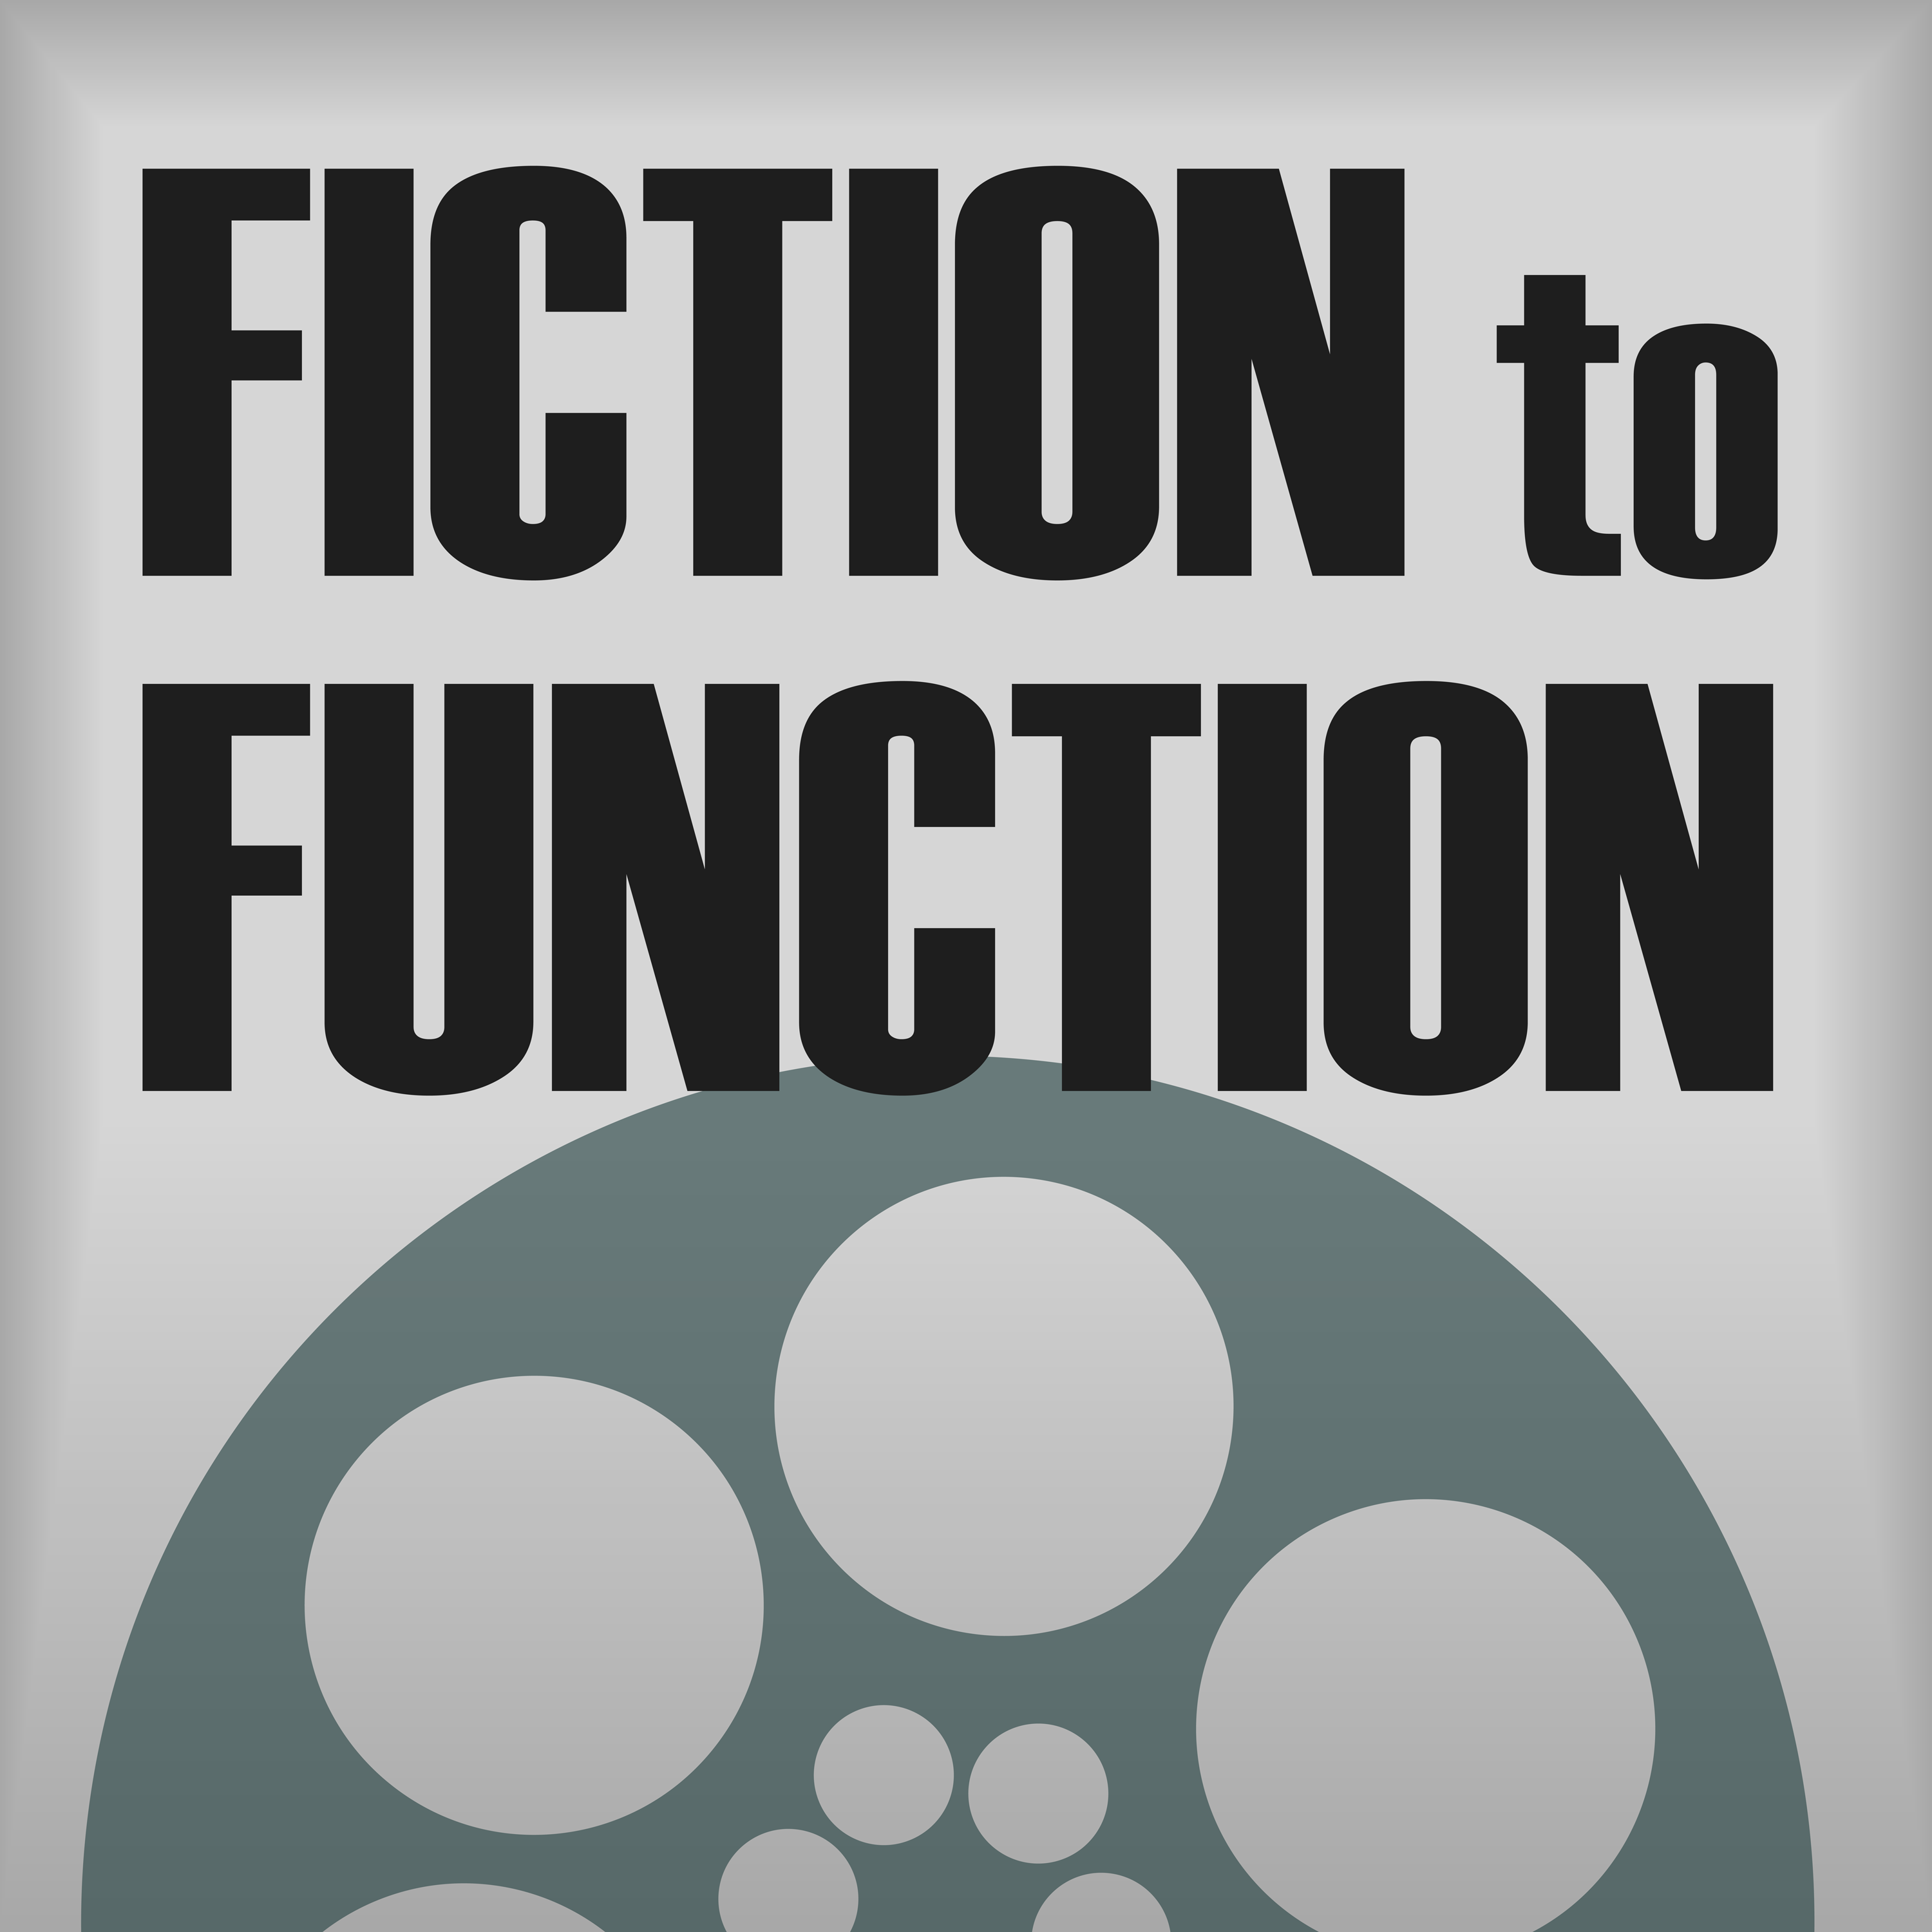 Fiction to Function